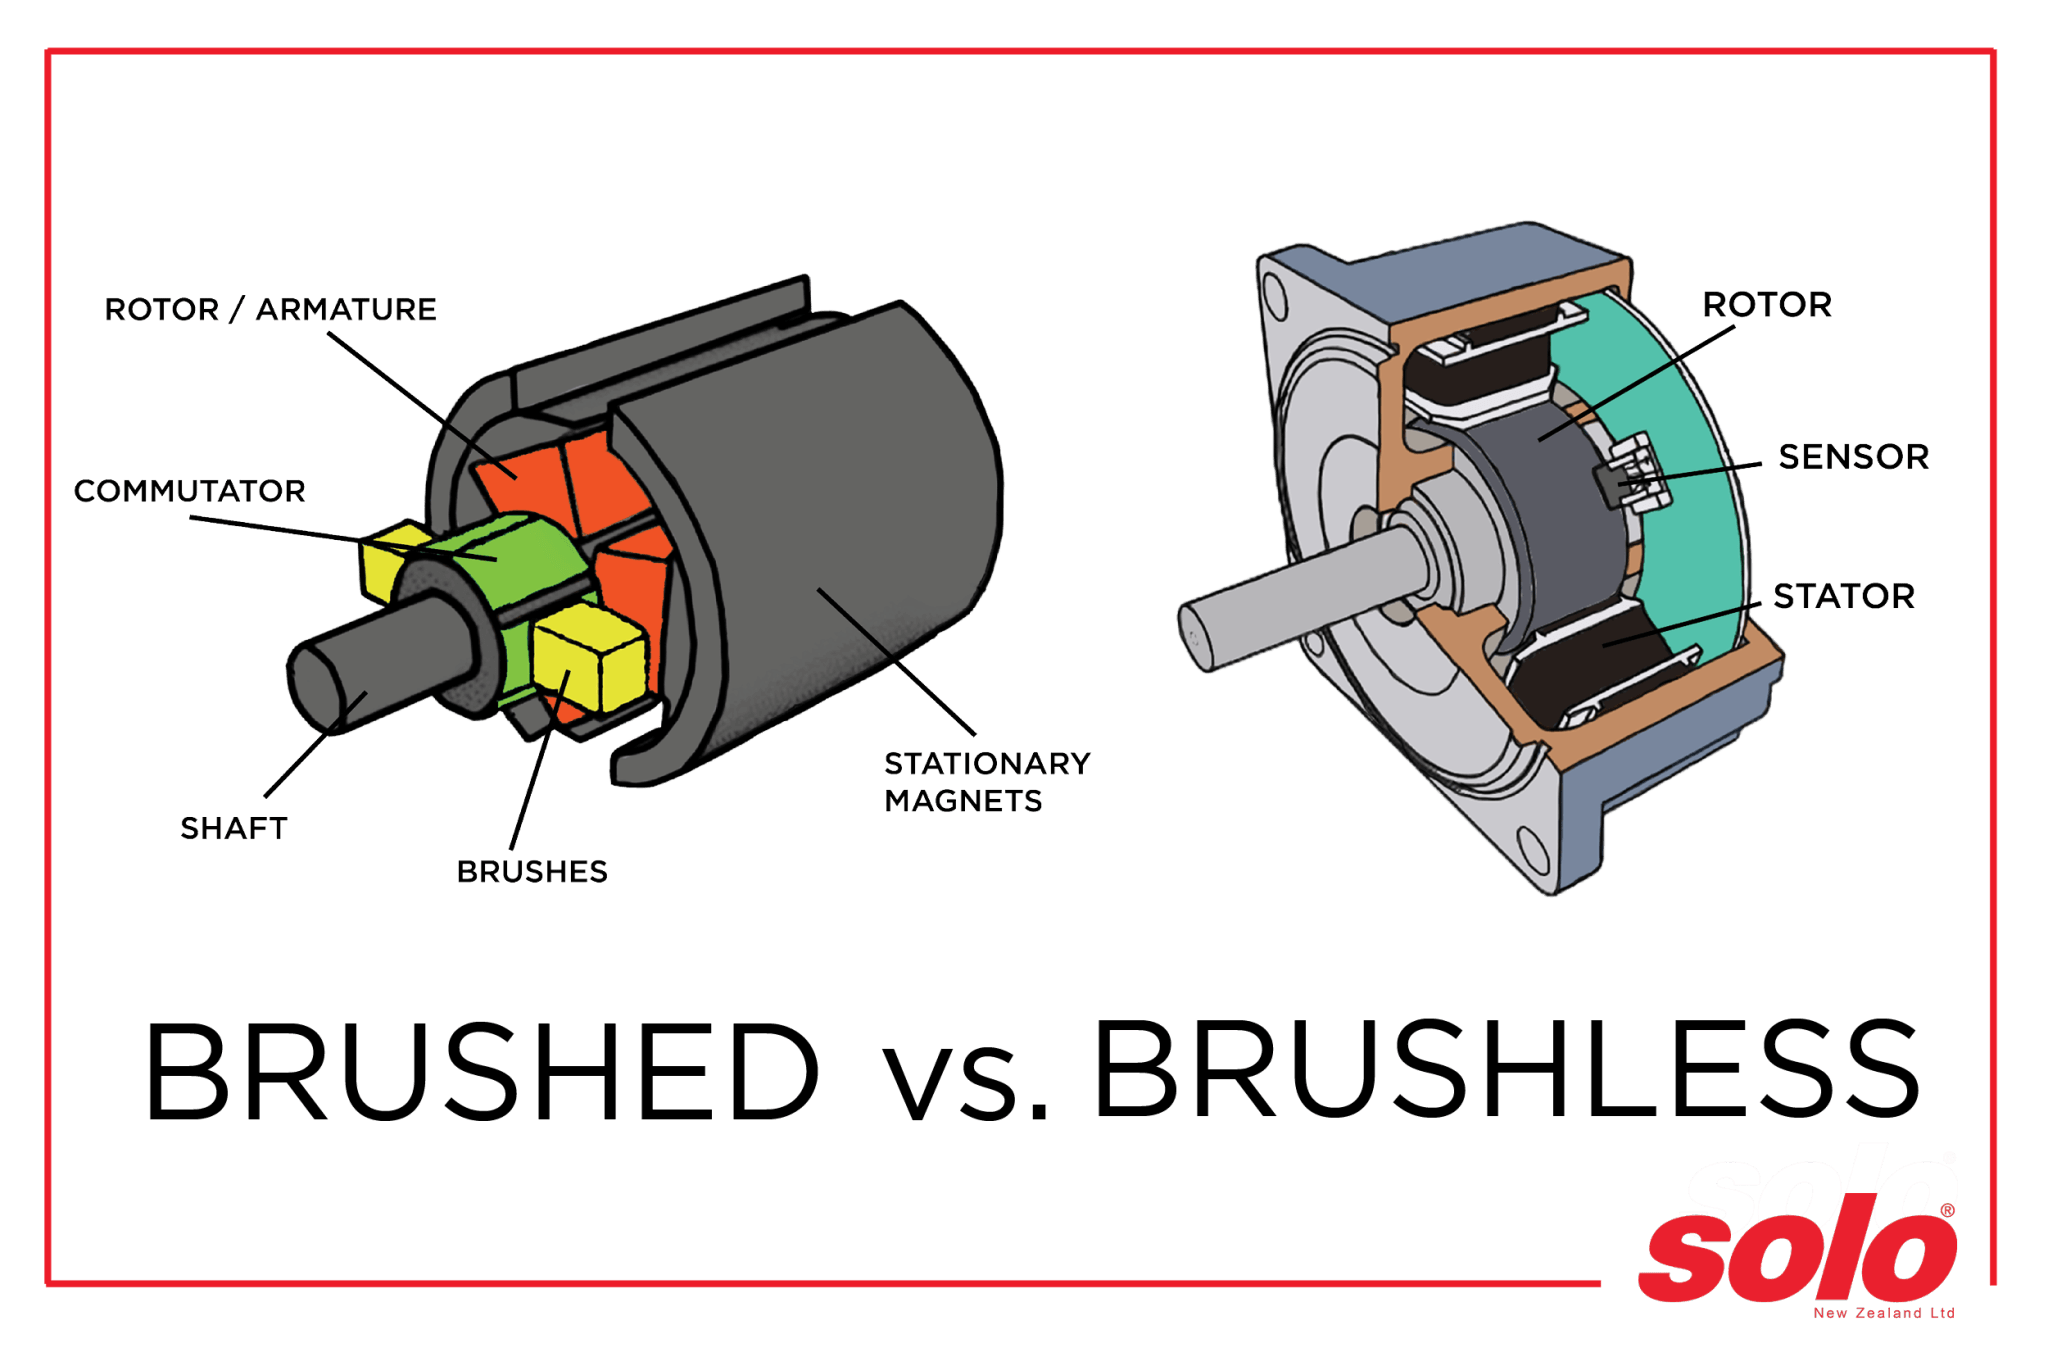 Brushed motors vs brushless motors - what's the difference? – Solo